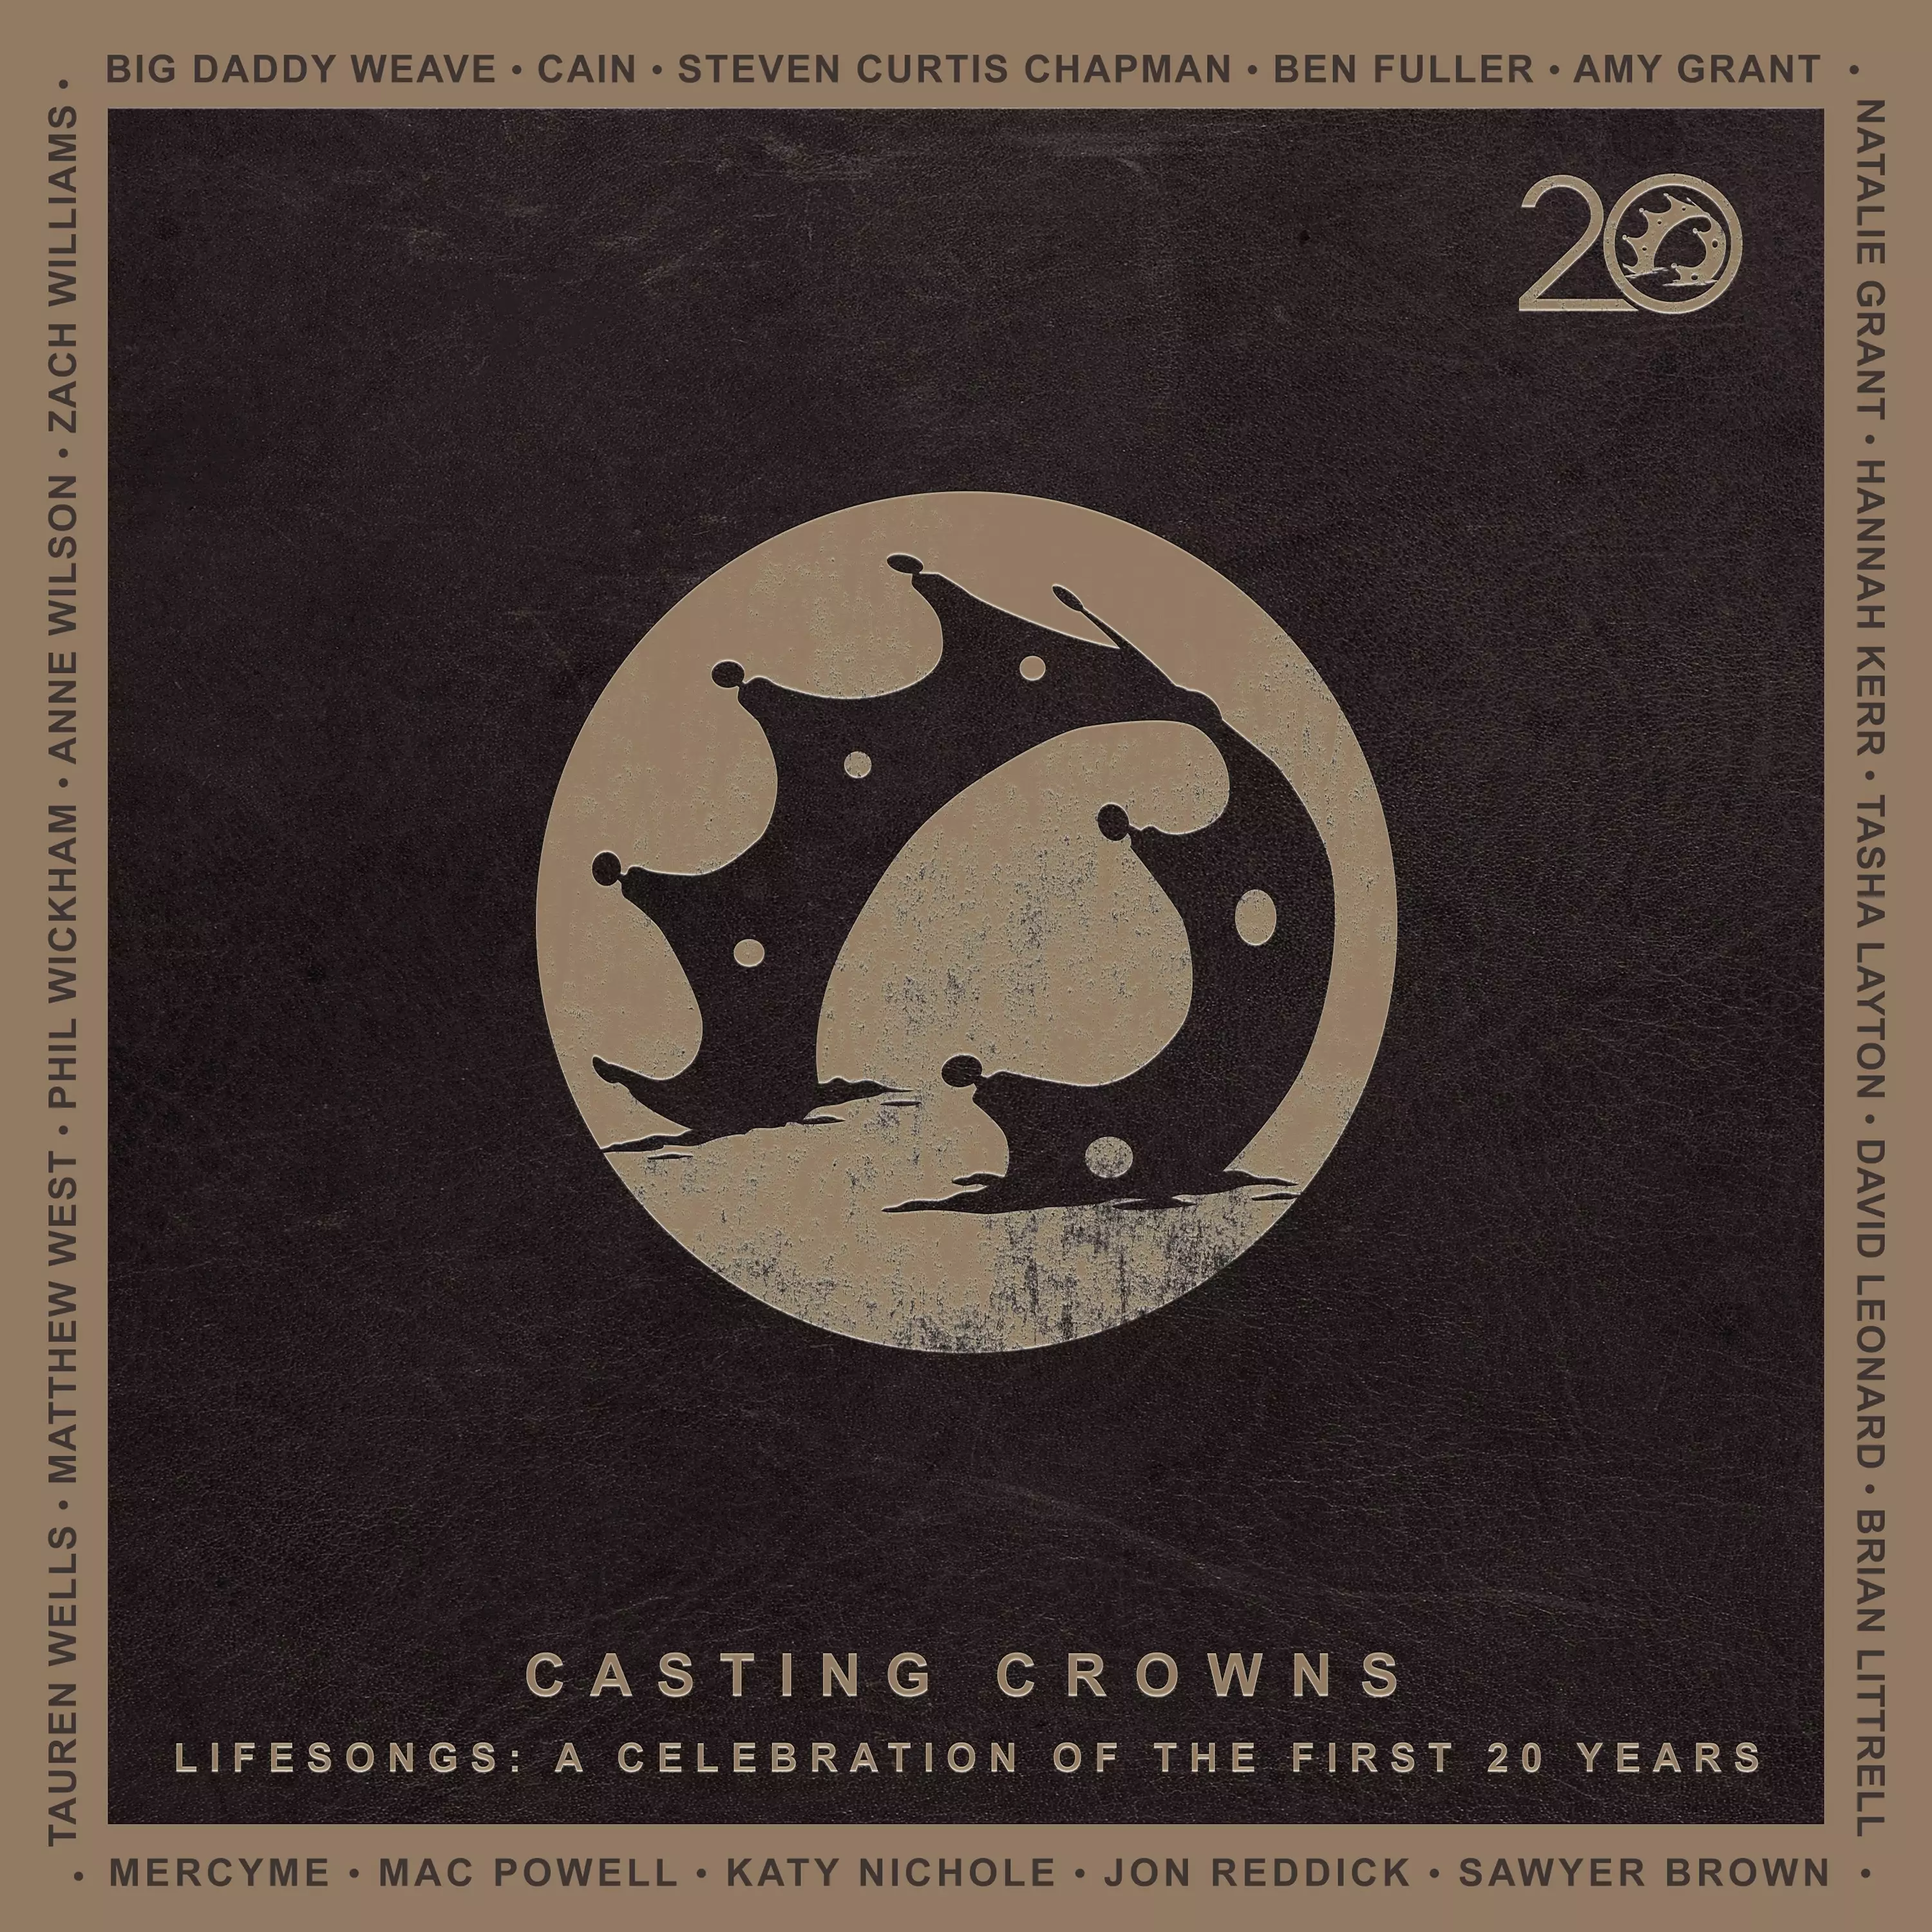 Audio CD-LIFESONGS: A CELEBRATION OF THE FIRST 20 YEARS